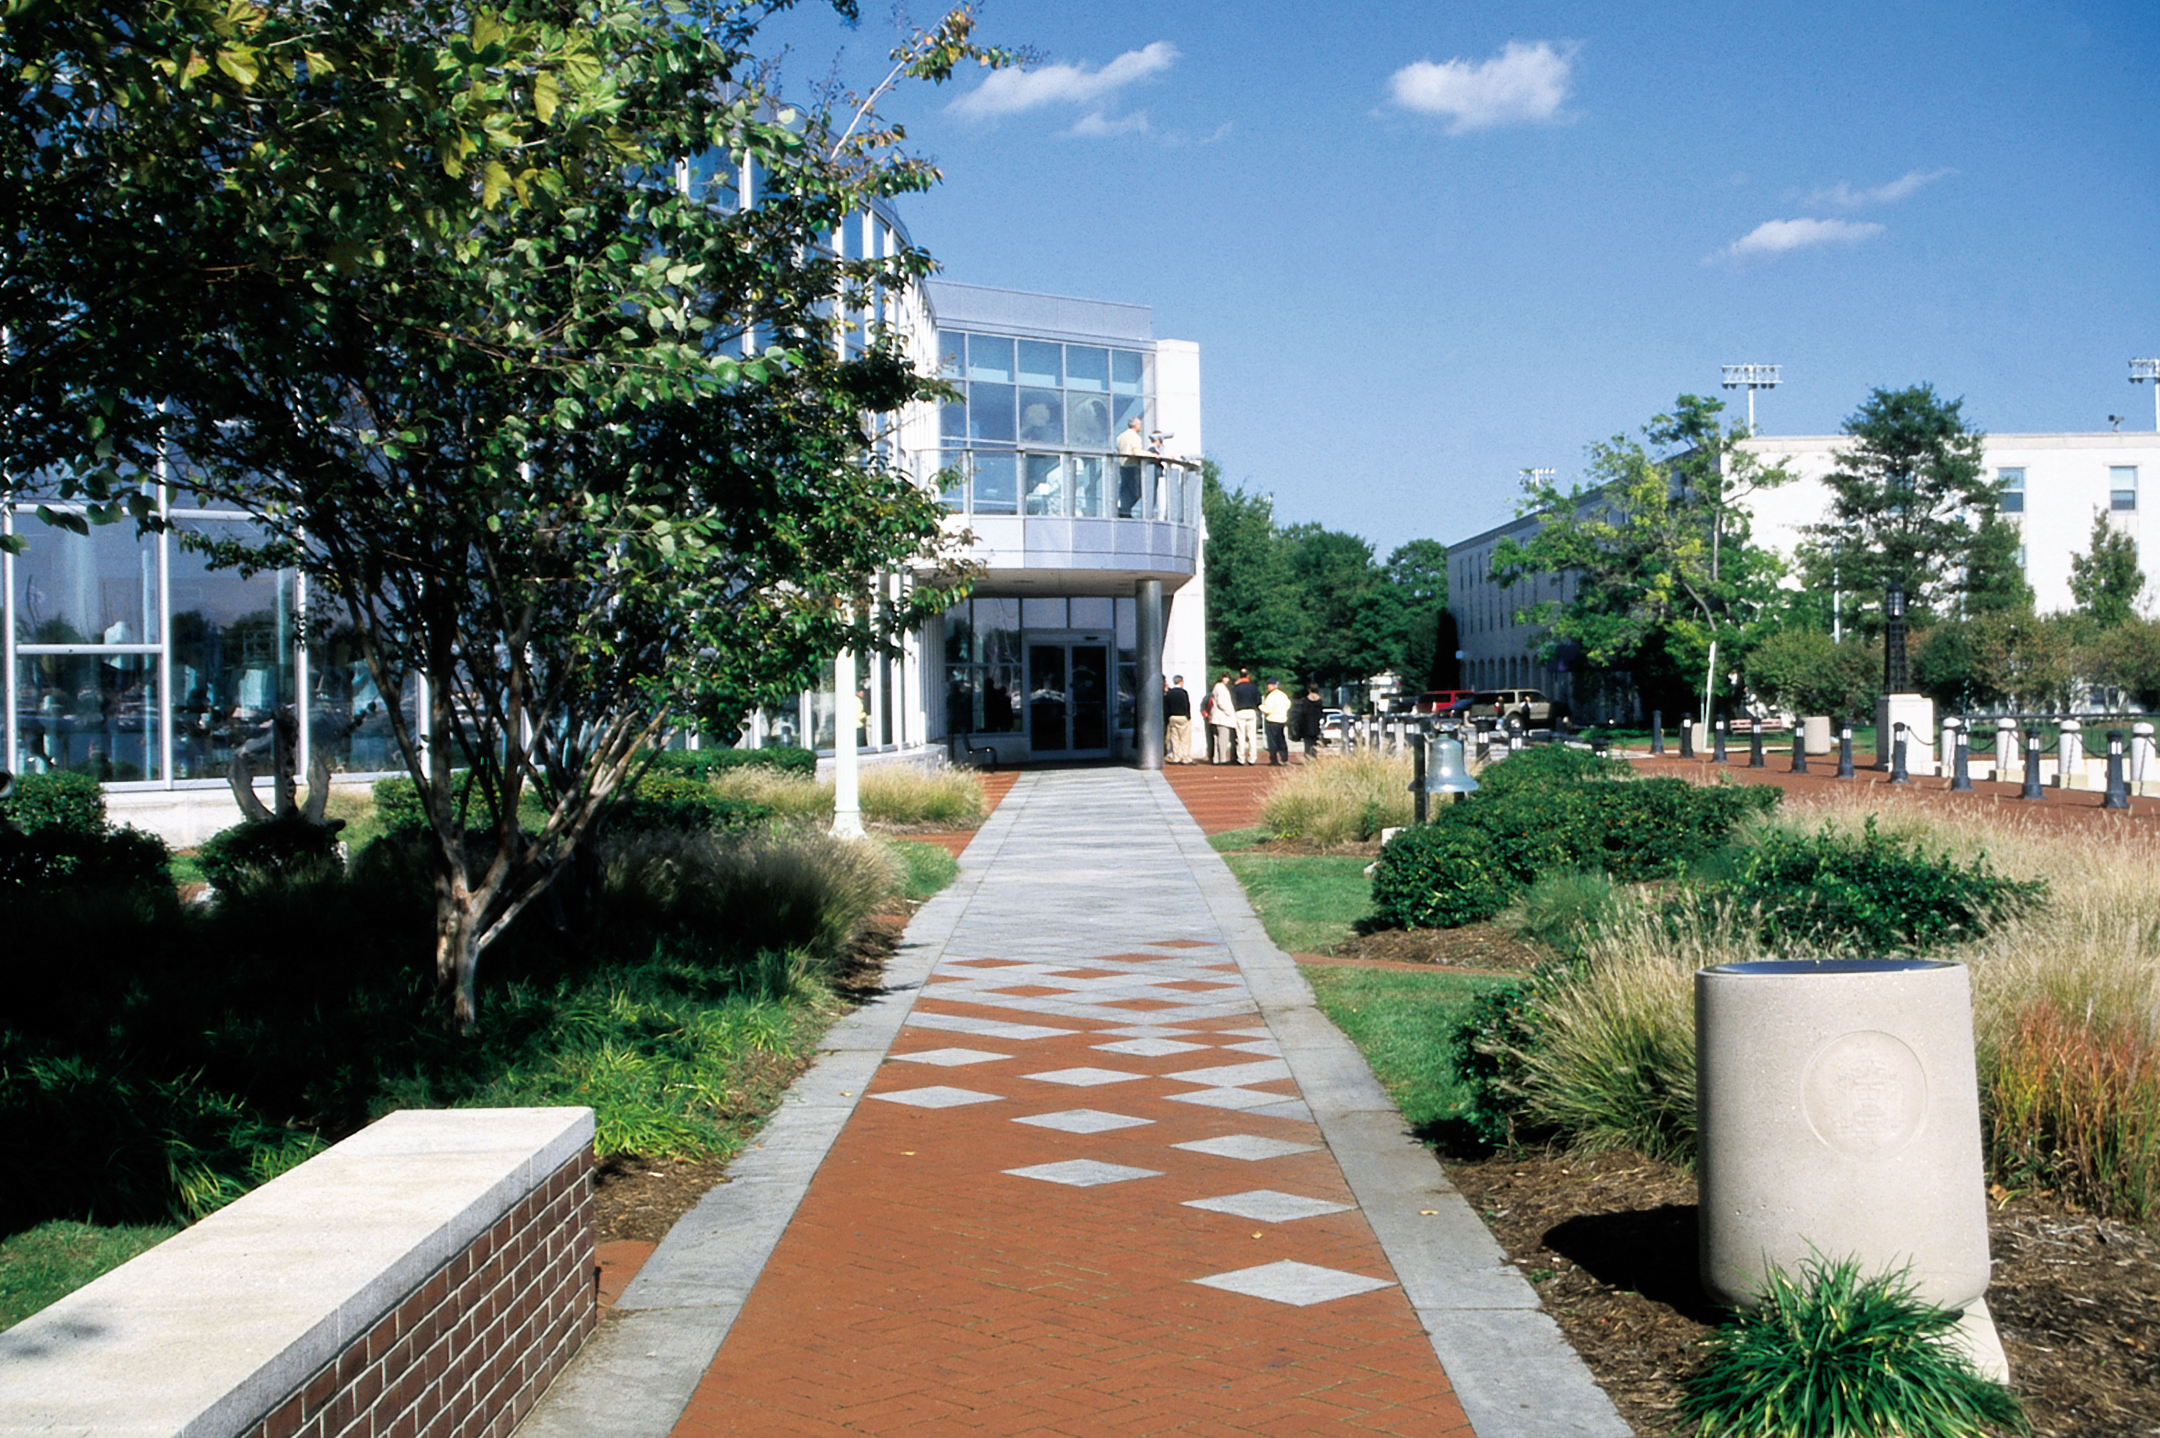   Project Location: &nbsp;&nbsp;Annapolis, MD  Completion: &nbsp;&nbsp;1985  Project Architect: &nbsp;CSD Architects  Primary Material Palette: &nbsp;&nbsp;granite, brick  Awards: &nbsp;Merit Award, American Society of Landscape Architects Maryland C